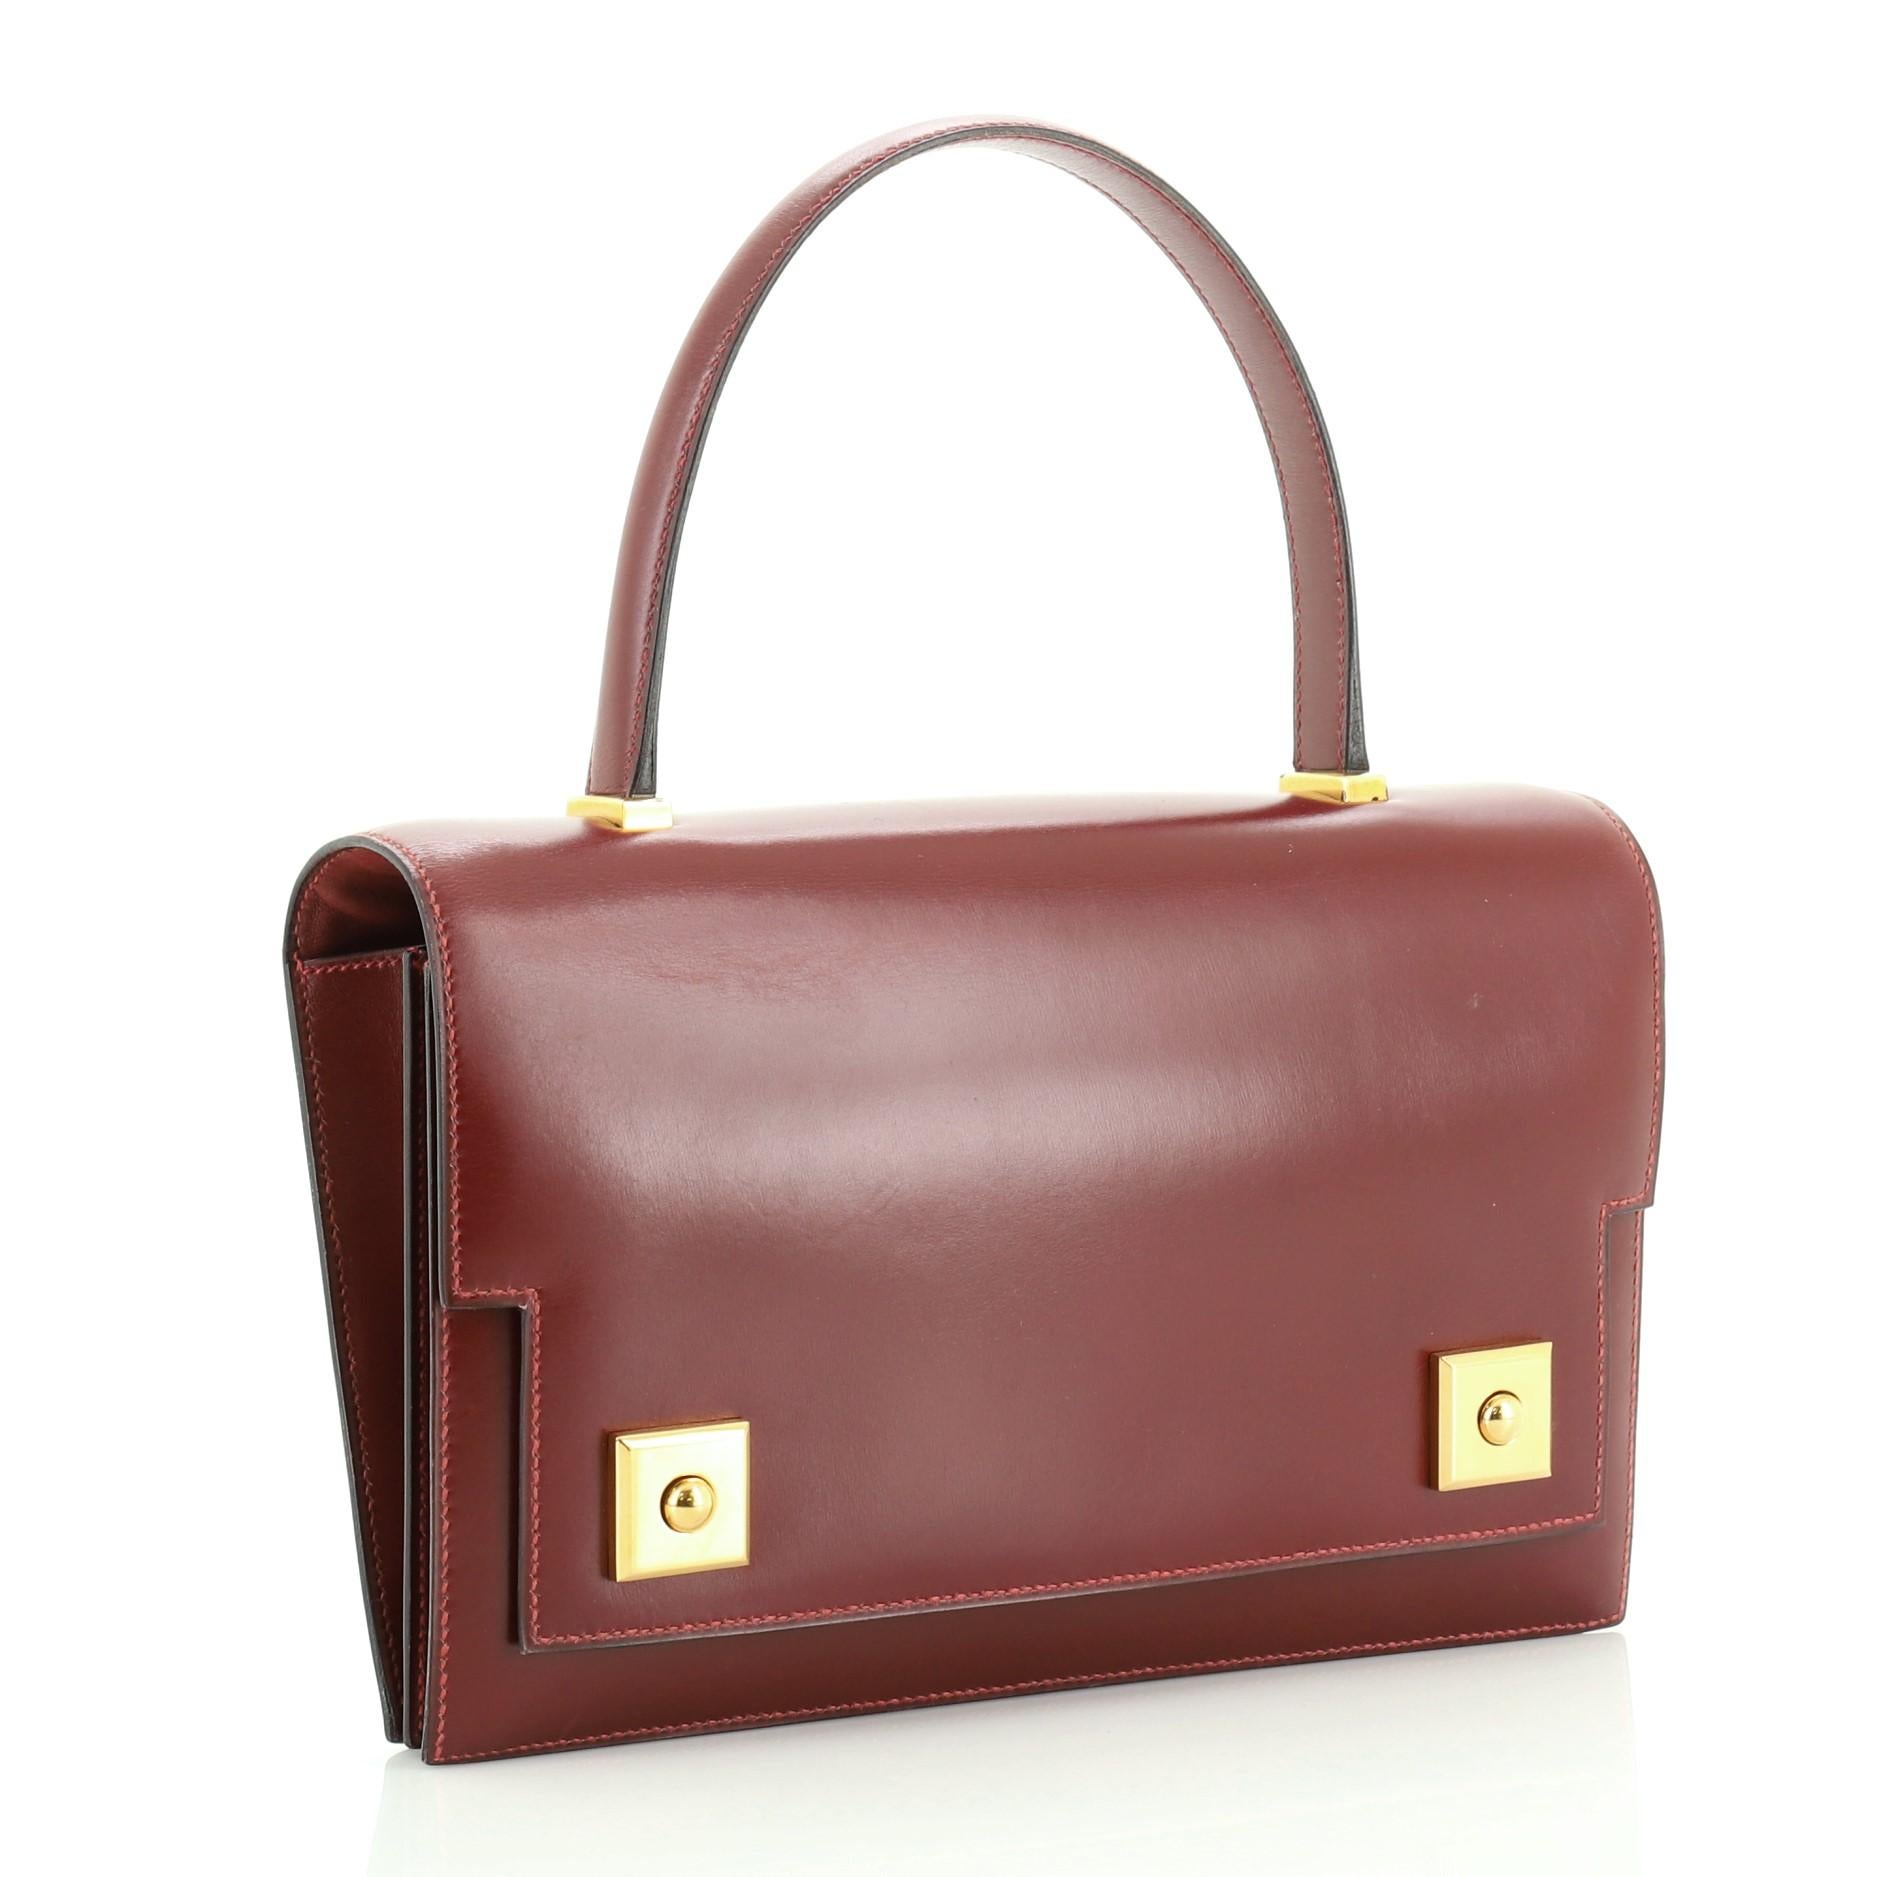 This Hermes Piano Handbag Box Calf, crafted from Rouge H red Box Calf leather, features a leather top handle, frontal flap, and gold hardware. Its magnetic peg-in-hole closures open to a Rouge H red Agneau leather interior with dual compartments,